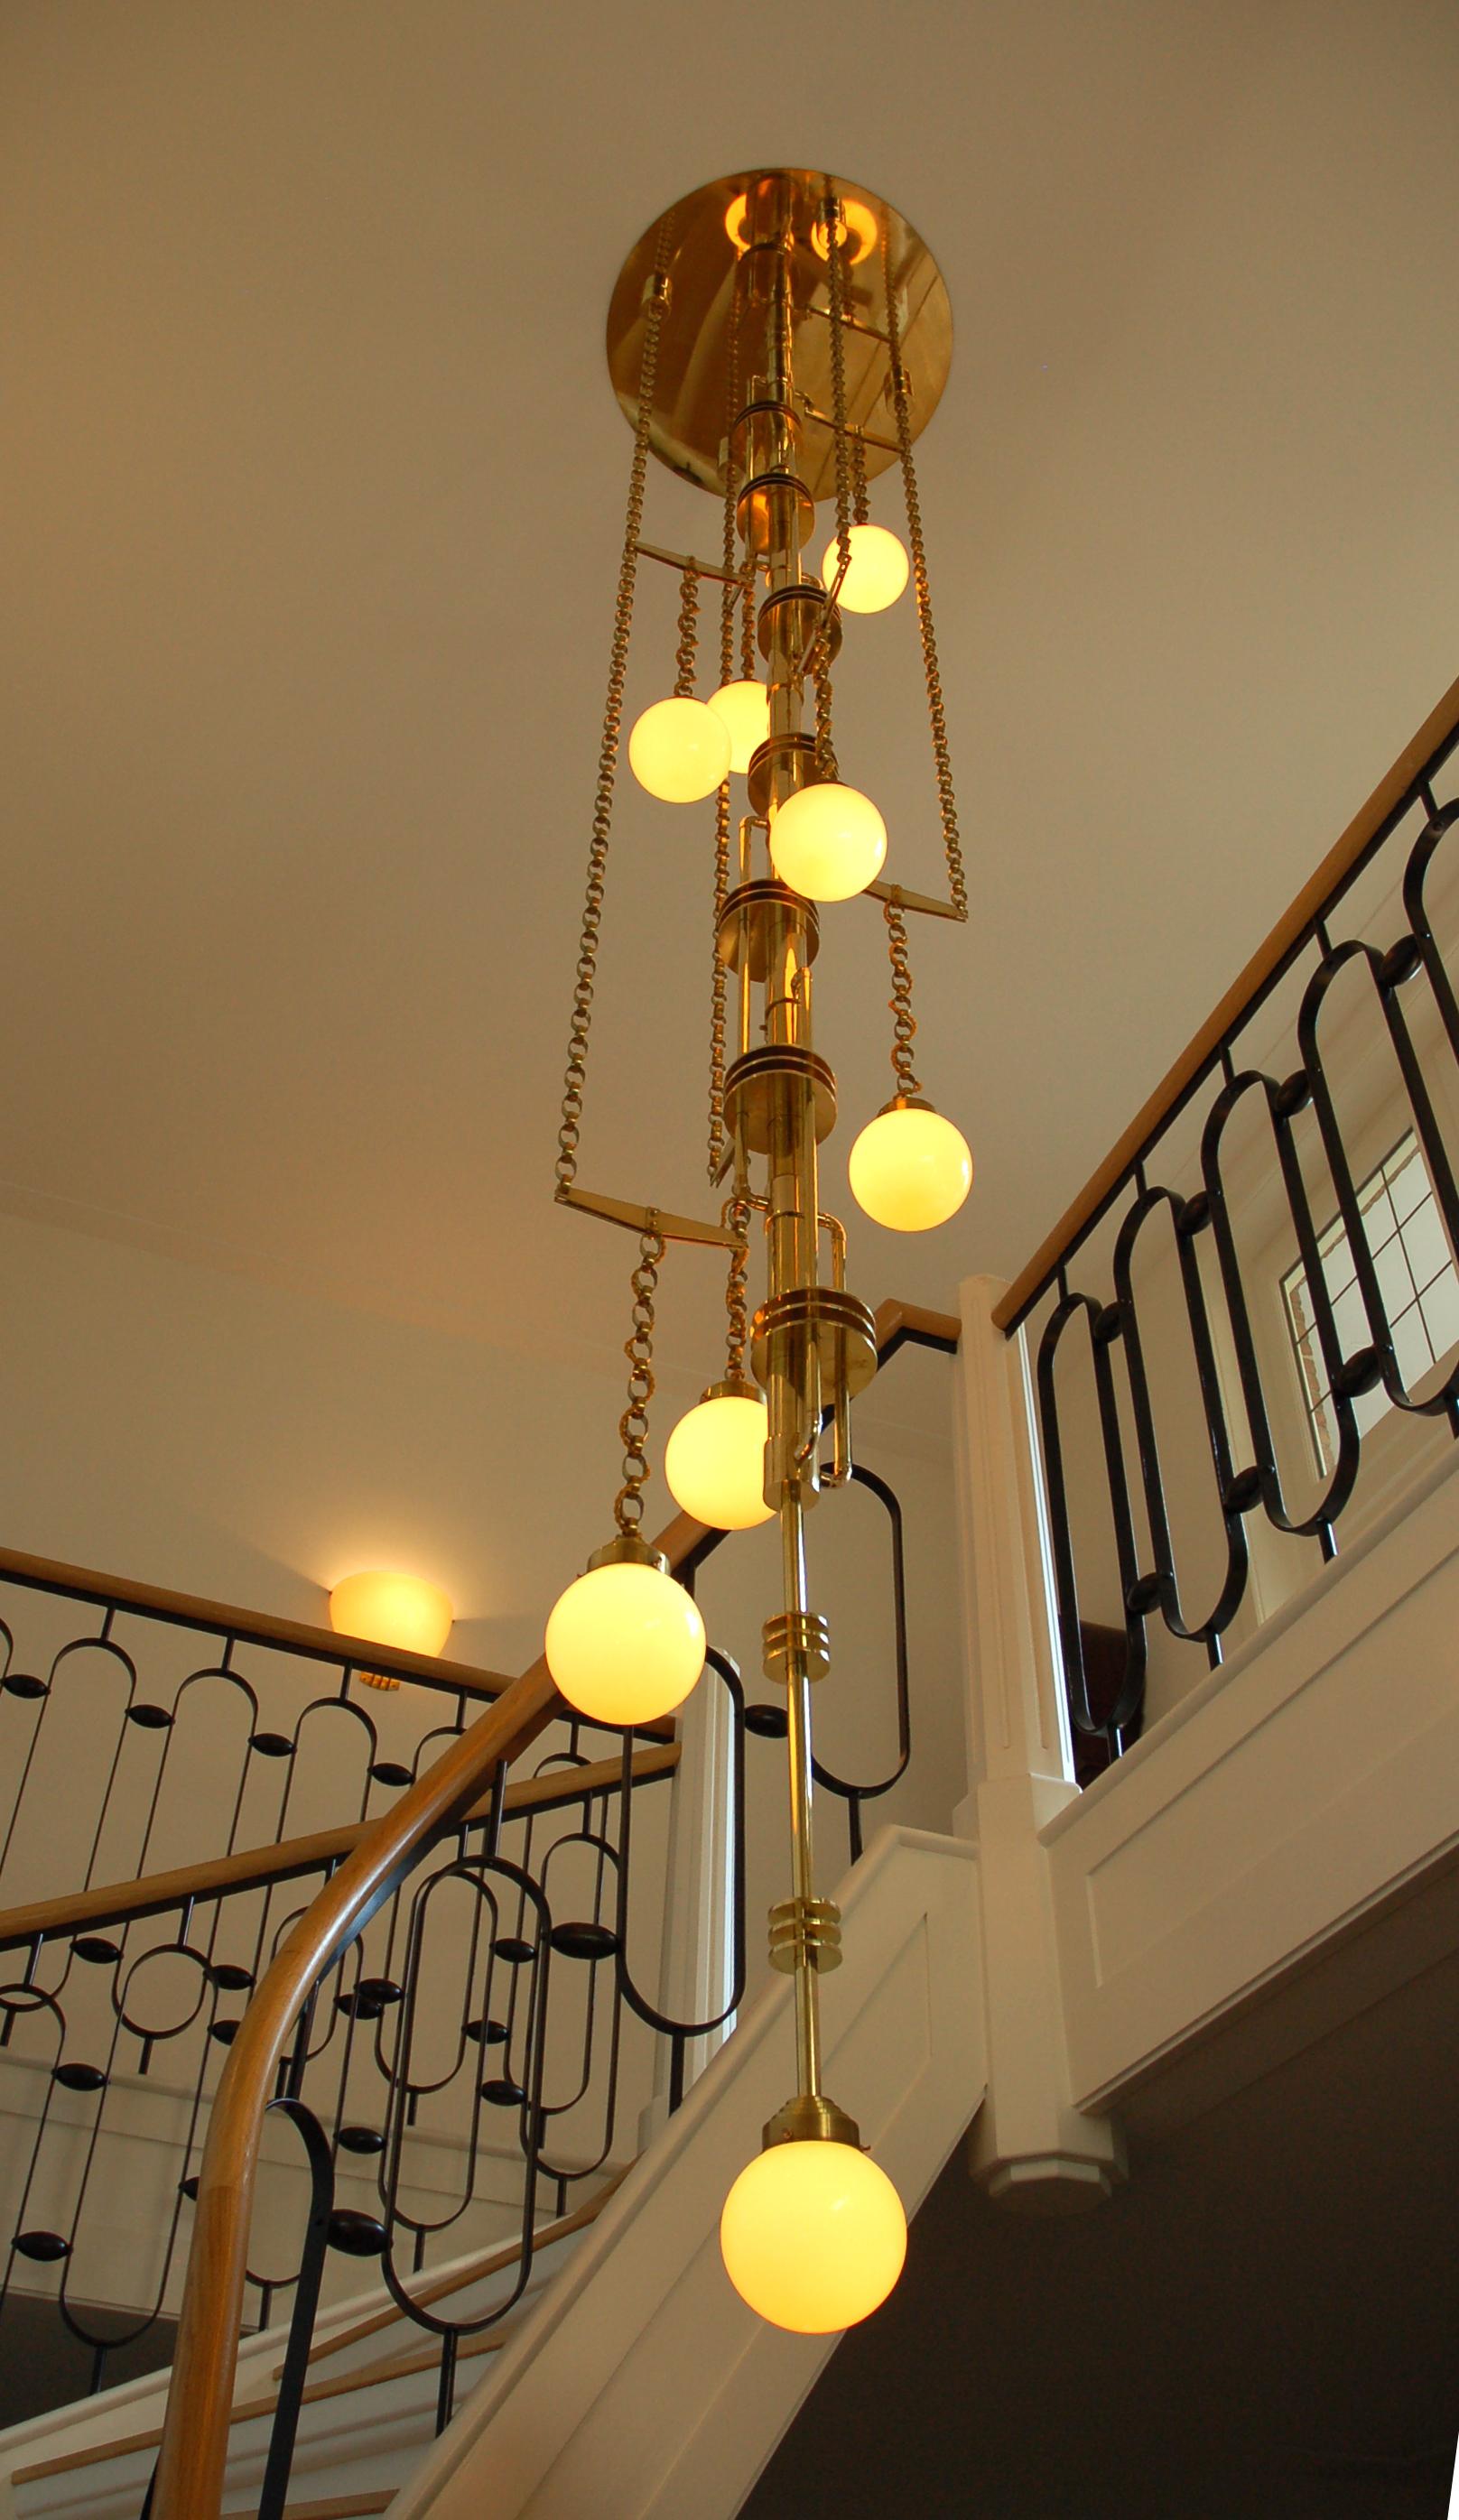 A stunning handmade brass Cascade in Amsterdam School-style (1920). The Cascade contains eight milk glass globes and welded brass chains. The finish of the lamp testifies to extremely good craftsmanship.
When interested we can also provide wall